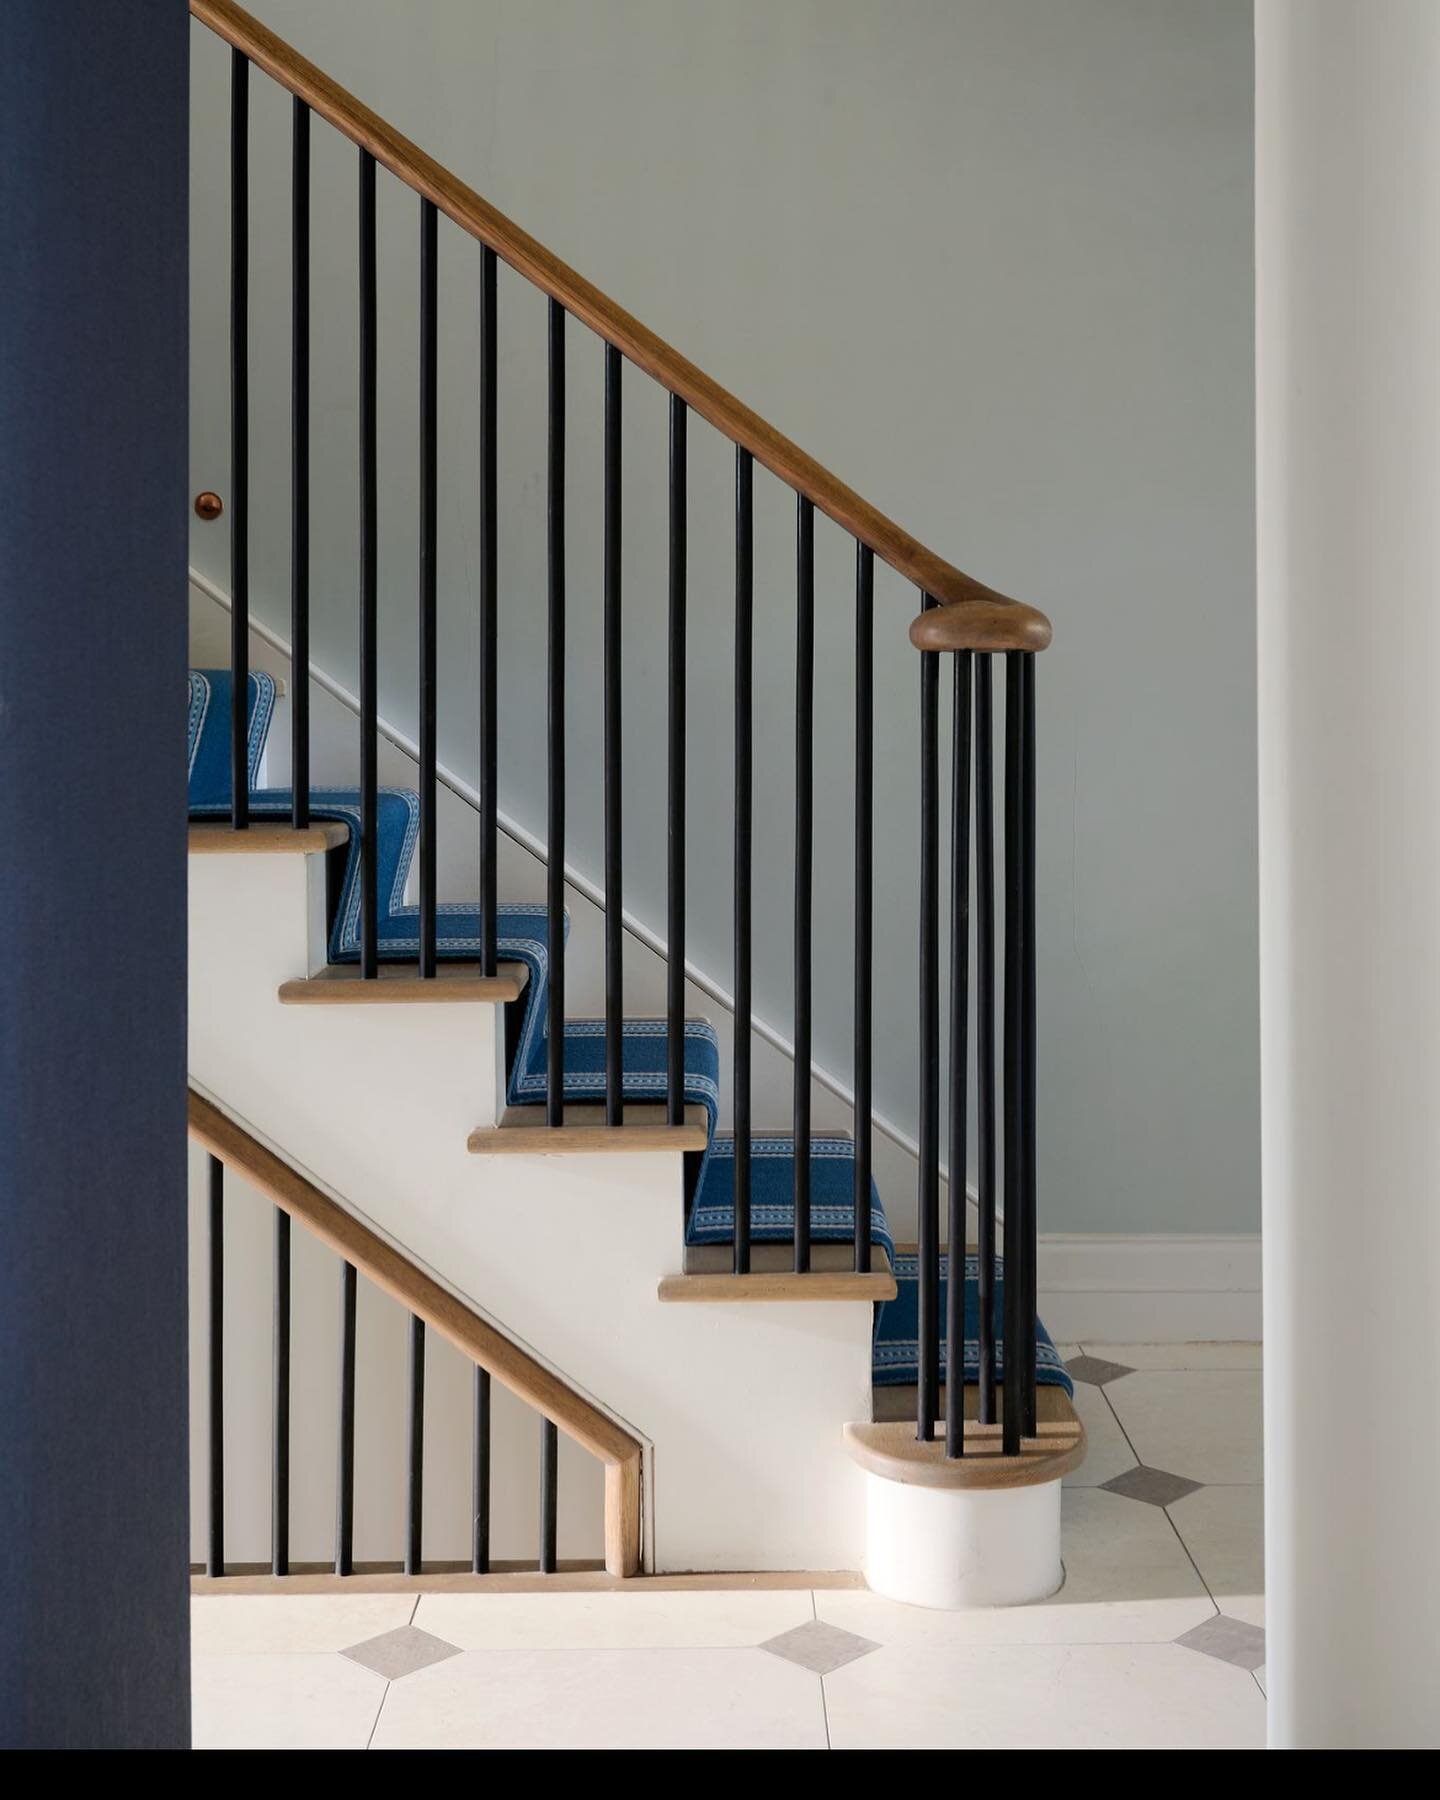 Beautiful stair case designed by @bensmitharch for our Hammersmith project&hellip;. Simple and stunning. It is the integral part of this 5 story house&hellip; connecting each floor with seamless elegance.  The hand rail was lovingly handcrafted on si